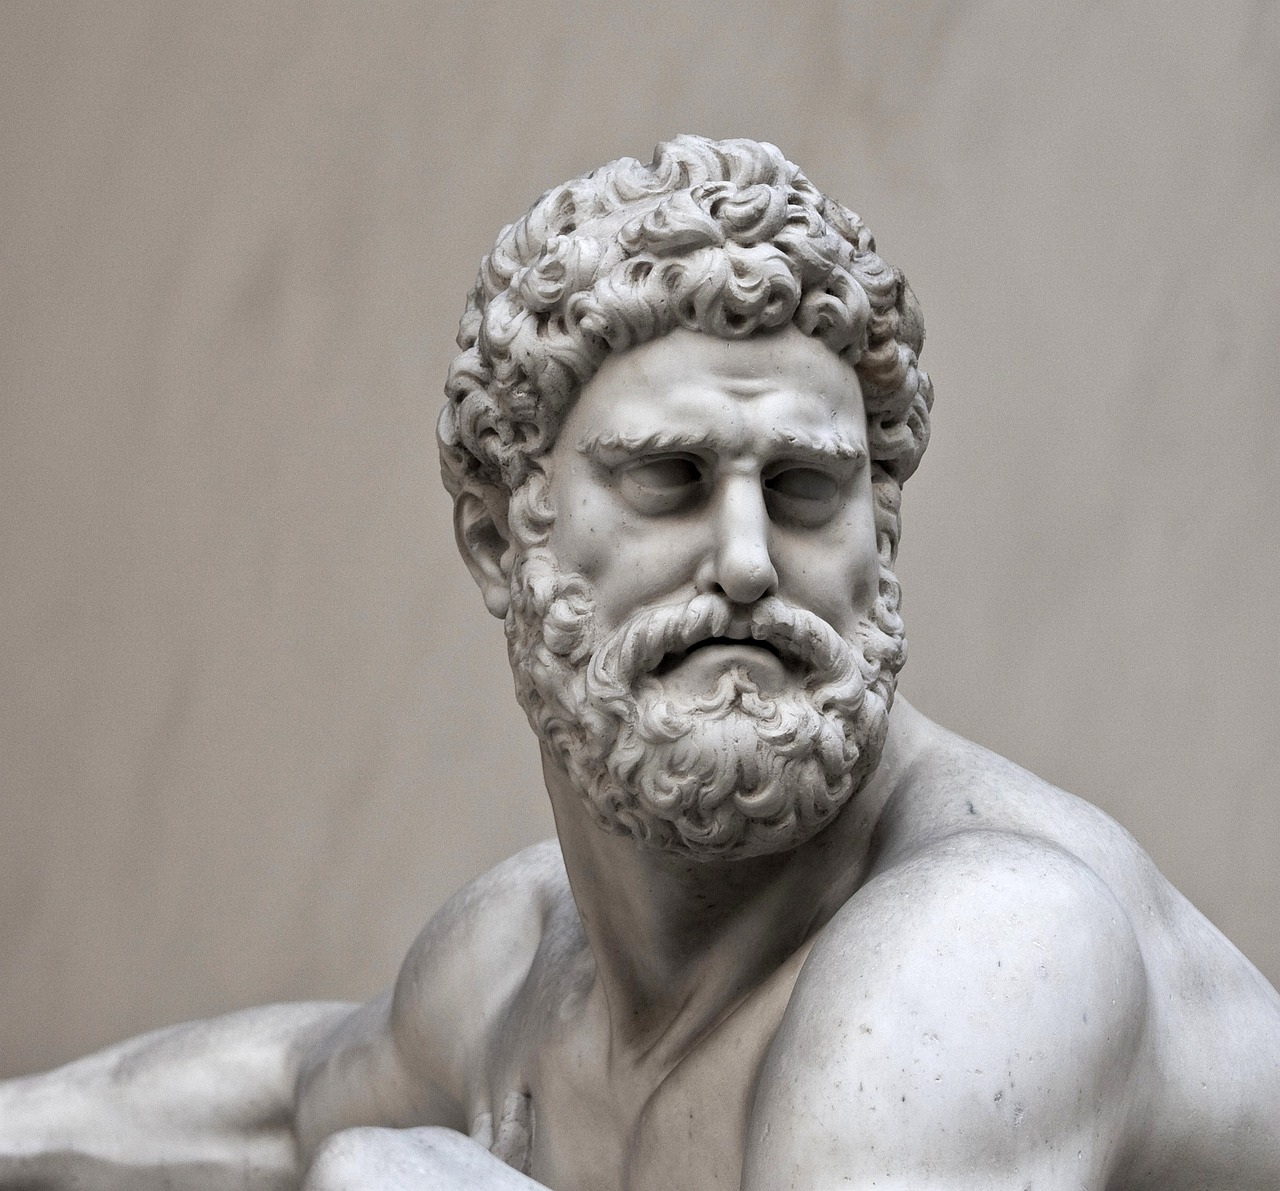 a close up of a statue of a man with a beard, a marble sculpture, inspired by Exekias, pexels contest winner, hulk like physique, pompous expression, gray men, guido